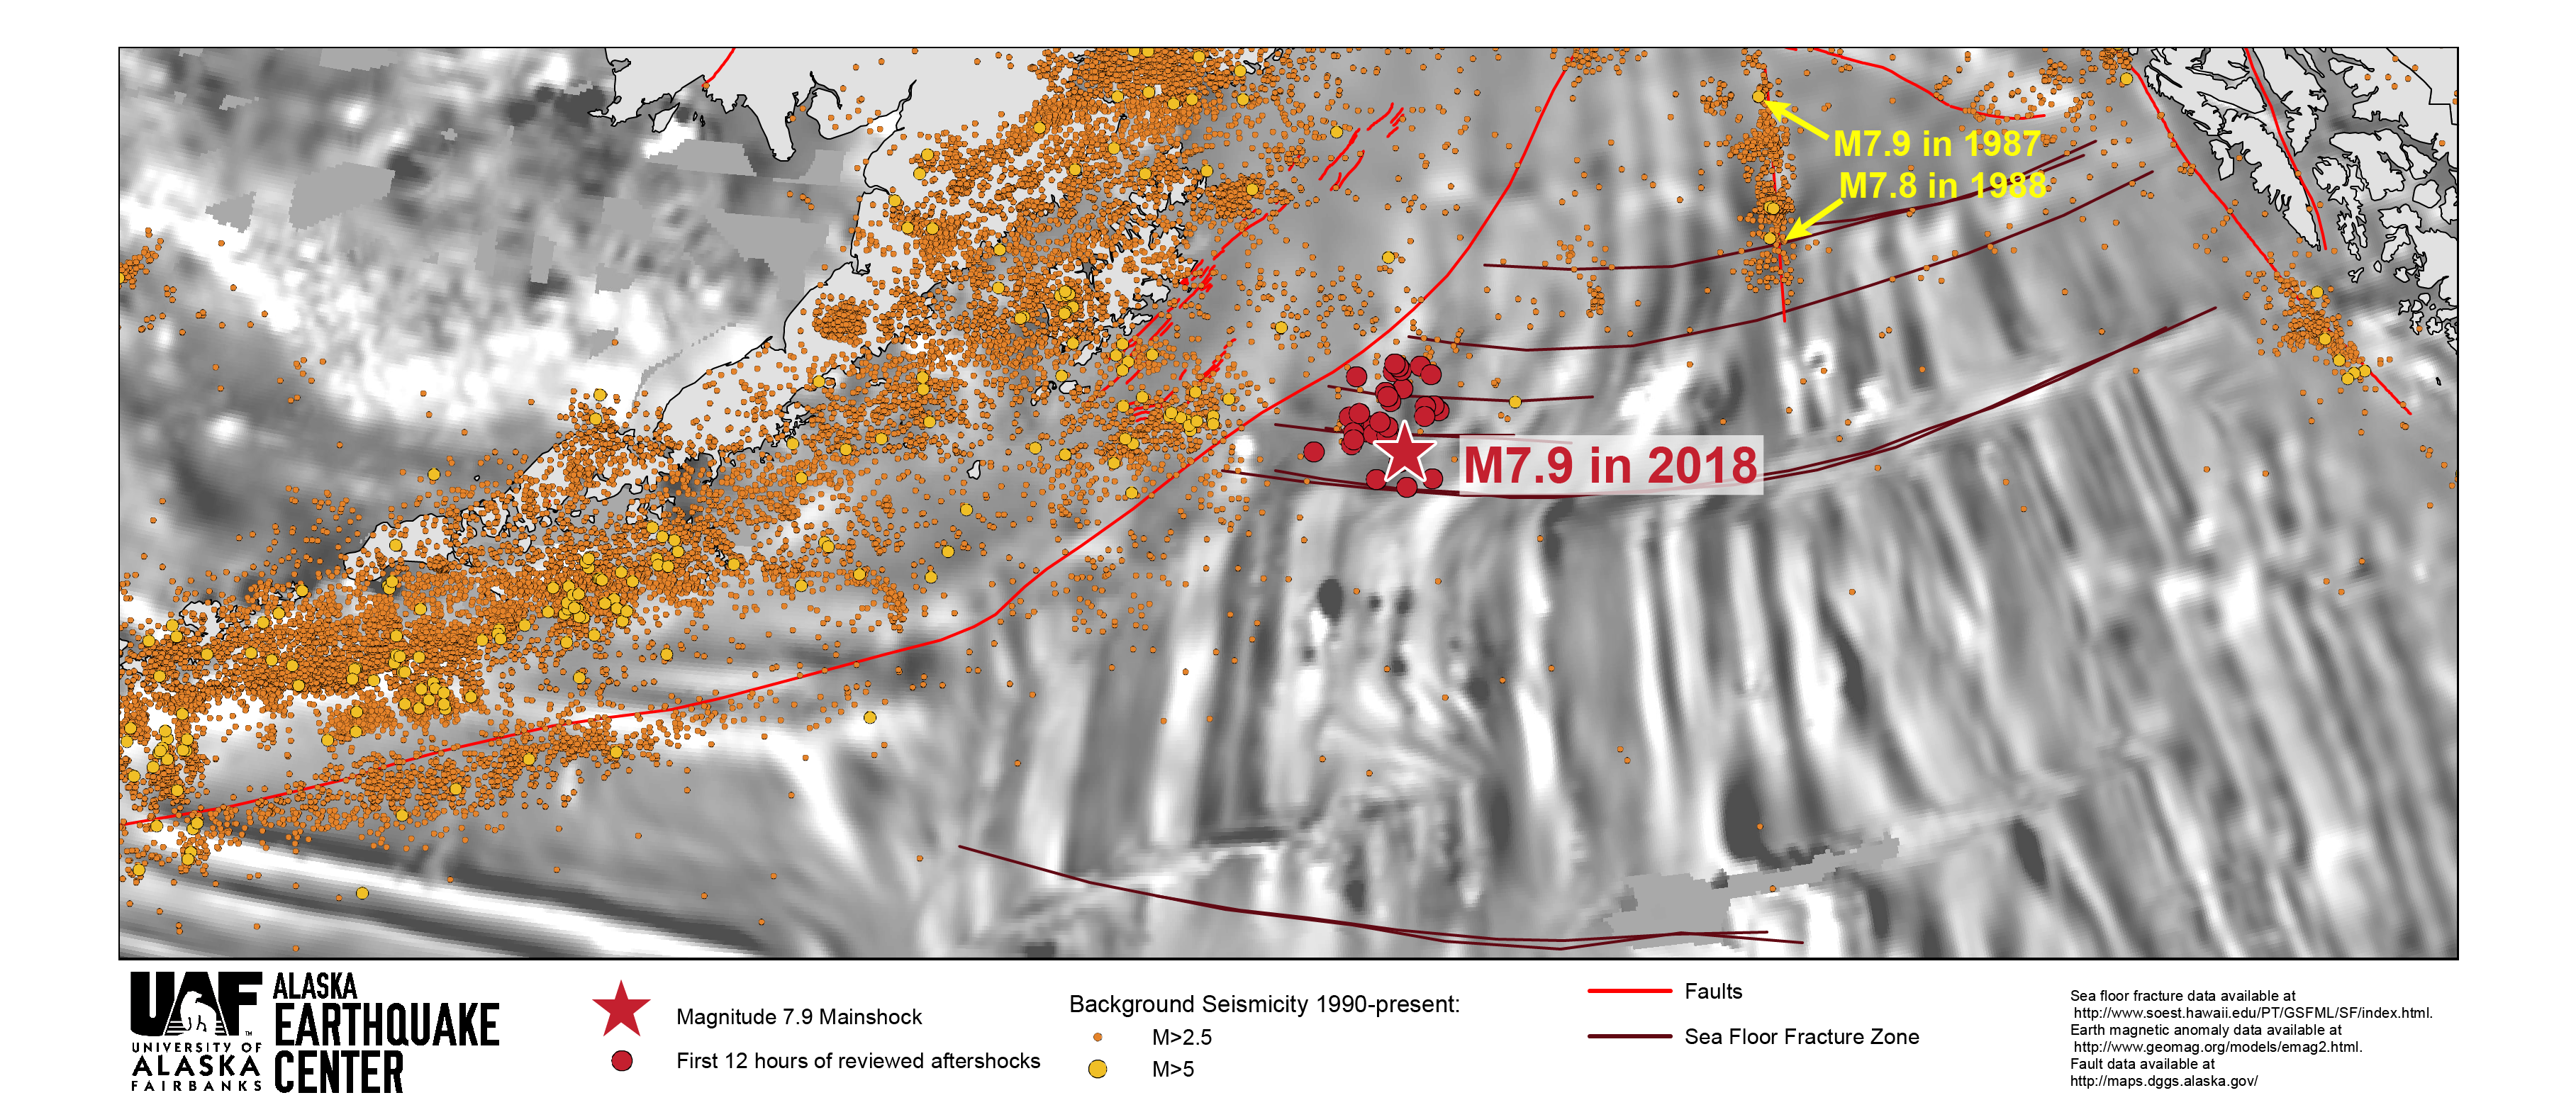 Map showing the magnitude 7.9 location and early aftershocks with seafloor magnetic anomalies and background seismicity